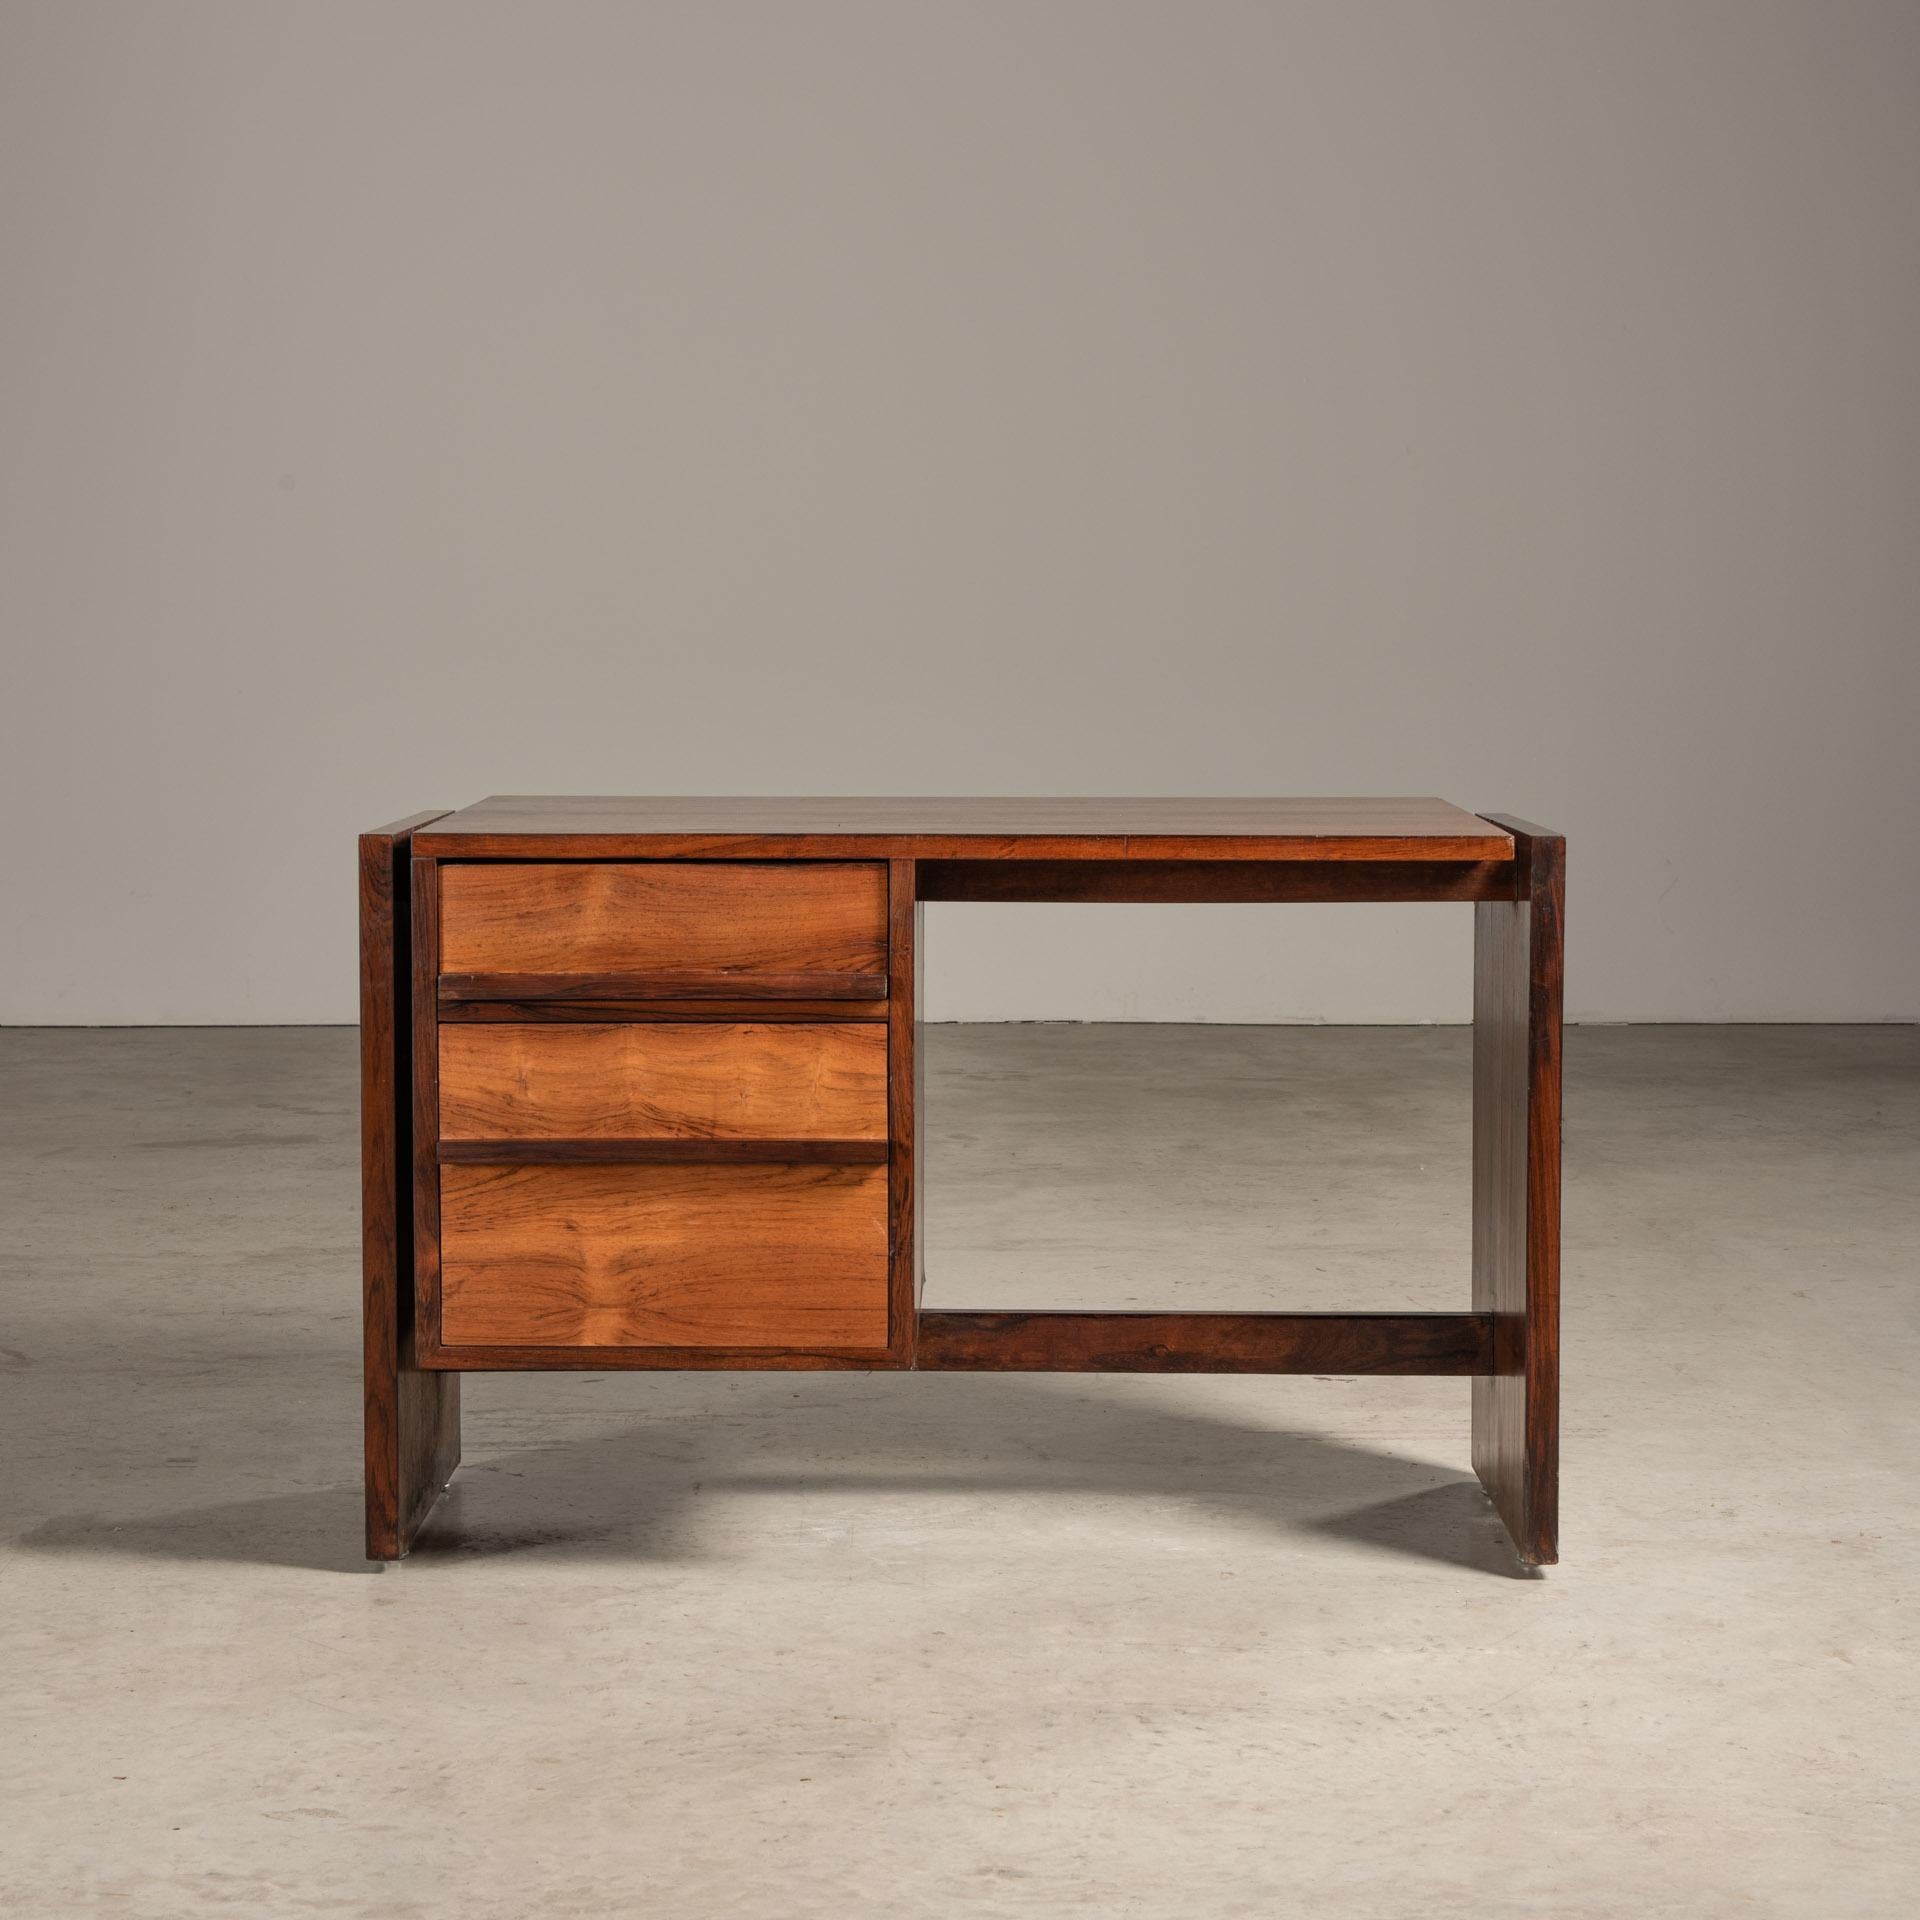 This writing table by Joaquim Tenreiro is a paragon of Brazilian mid-century modernism, distinguished by its sleek geometry, graceful proportions, and a seamless blend of time-honored materials with avant-garde design. Tenreiro, often hailed as the